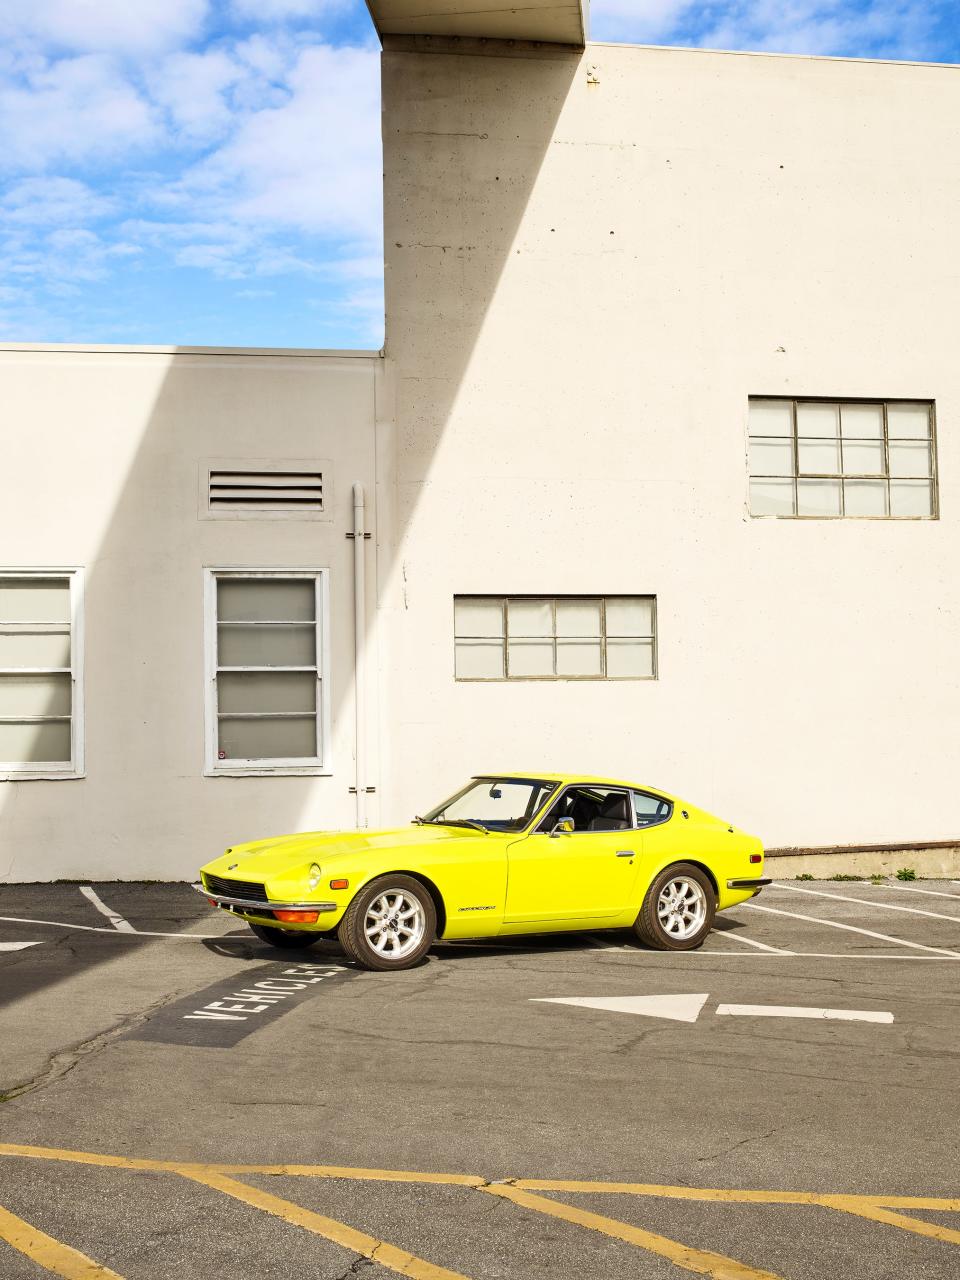 Bring a Trailer’s company-owned 1973 Datsun 240Z.